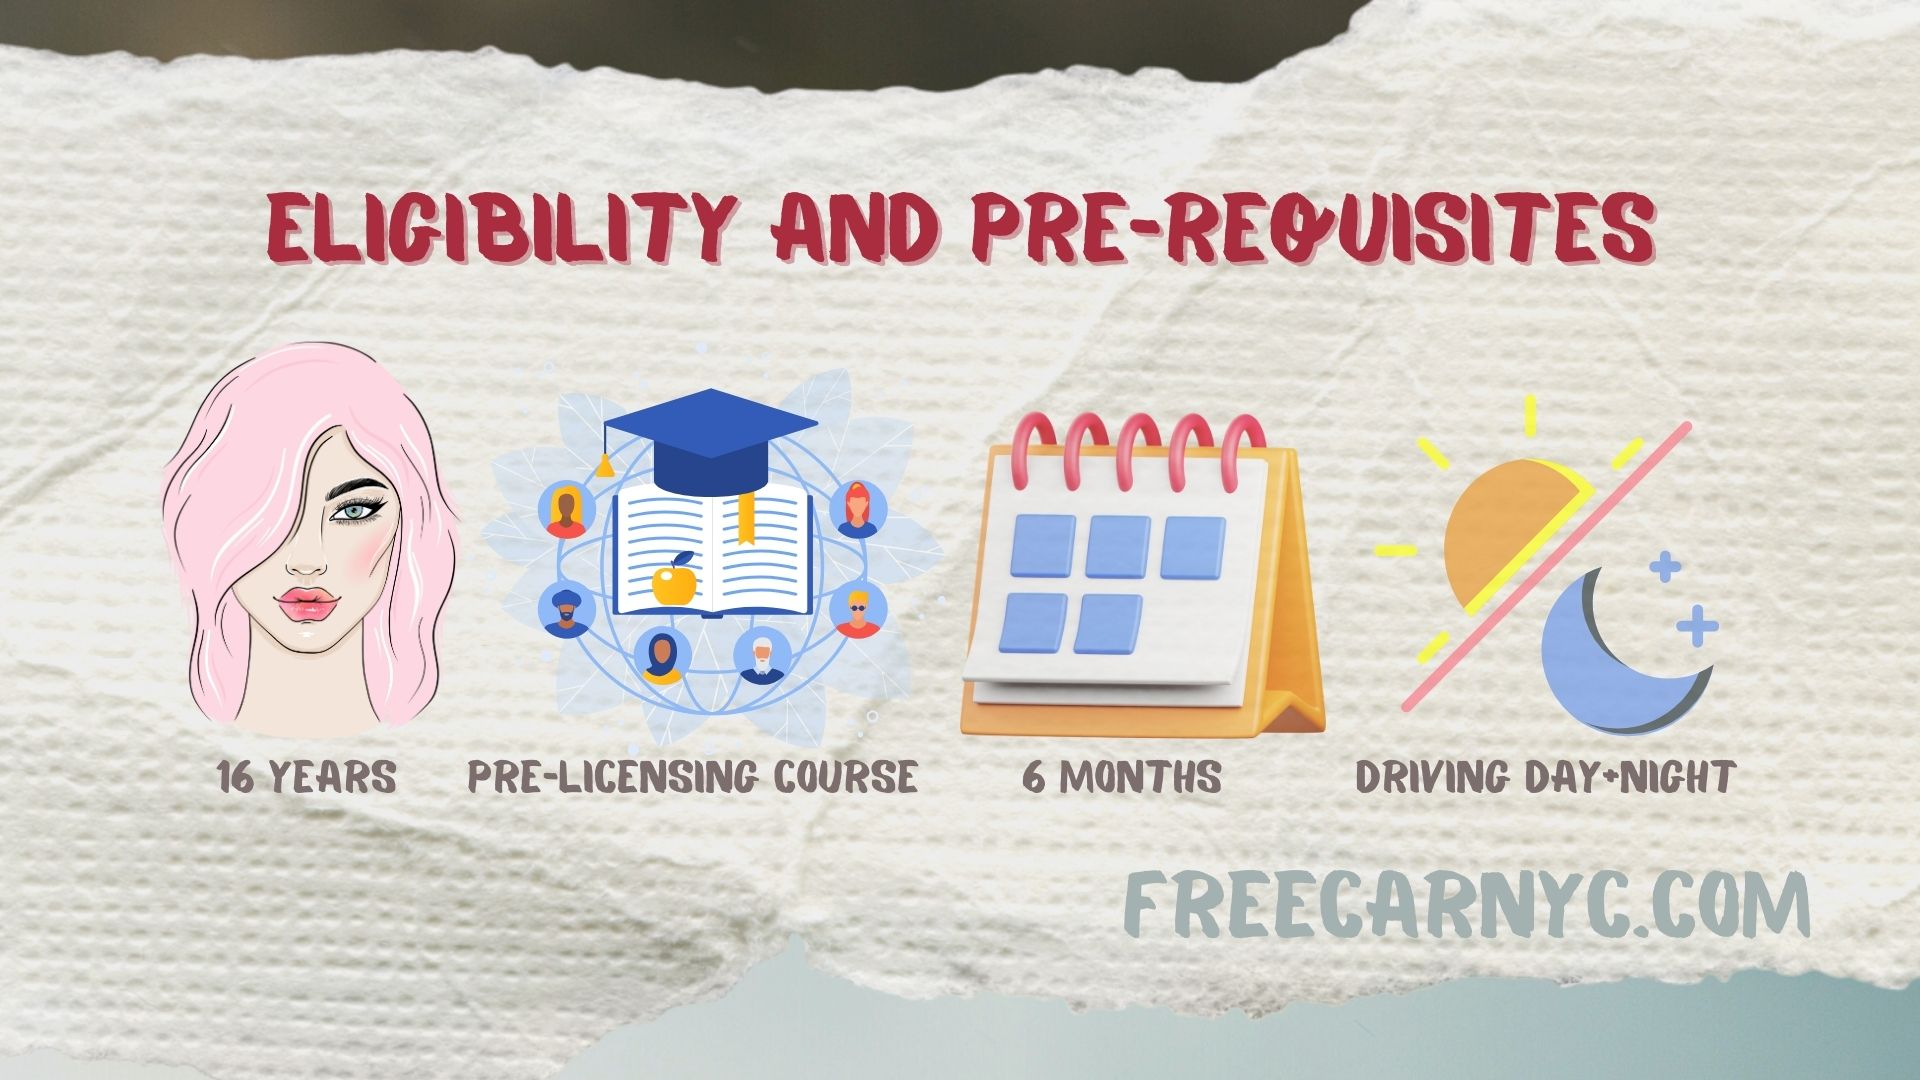 Eligibility and Pre-requisites